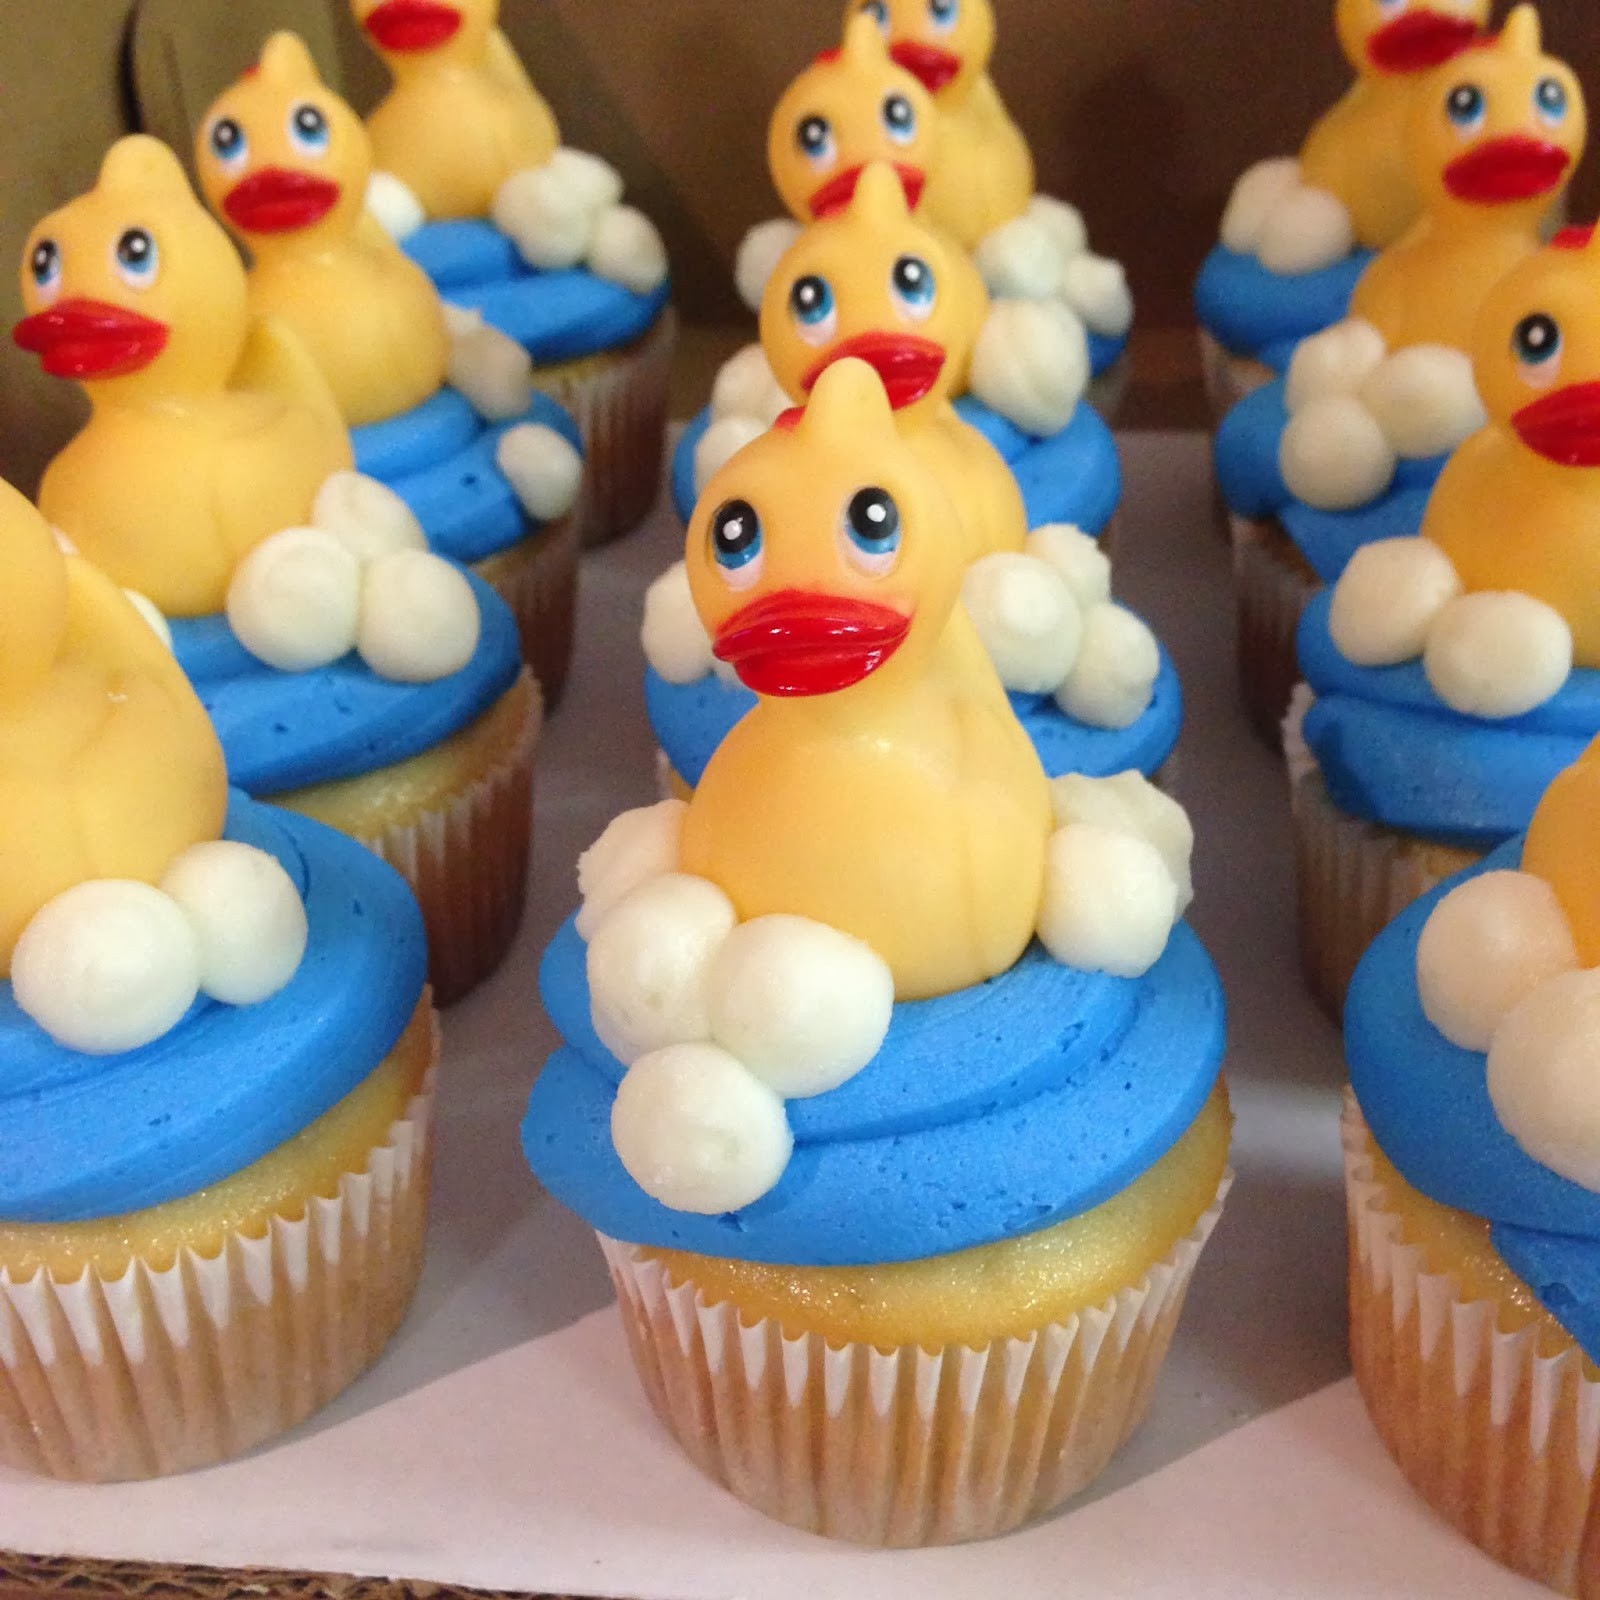 Rubber Duckie Cupcakes
 Cakes by Mindy Rubber Duckie Cupcakes